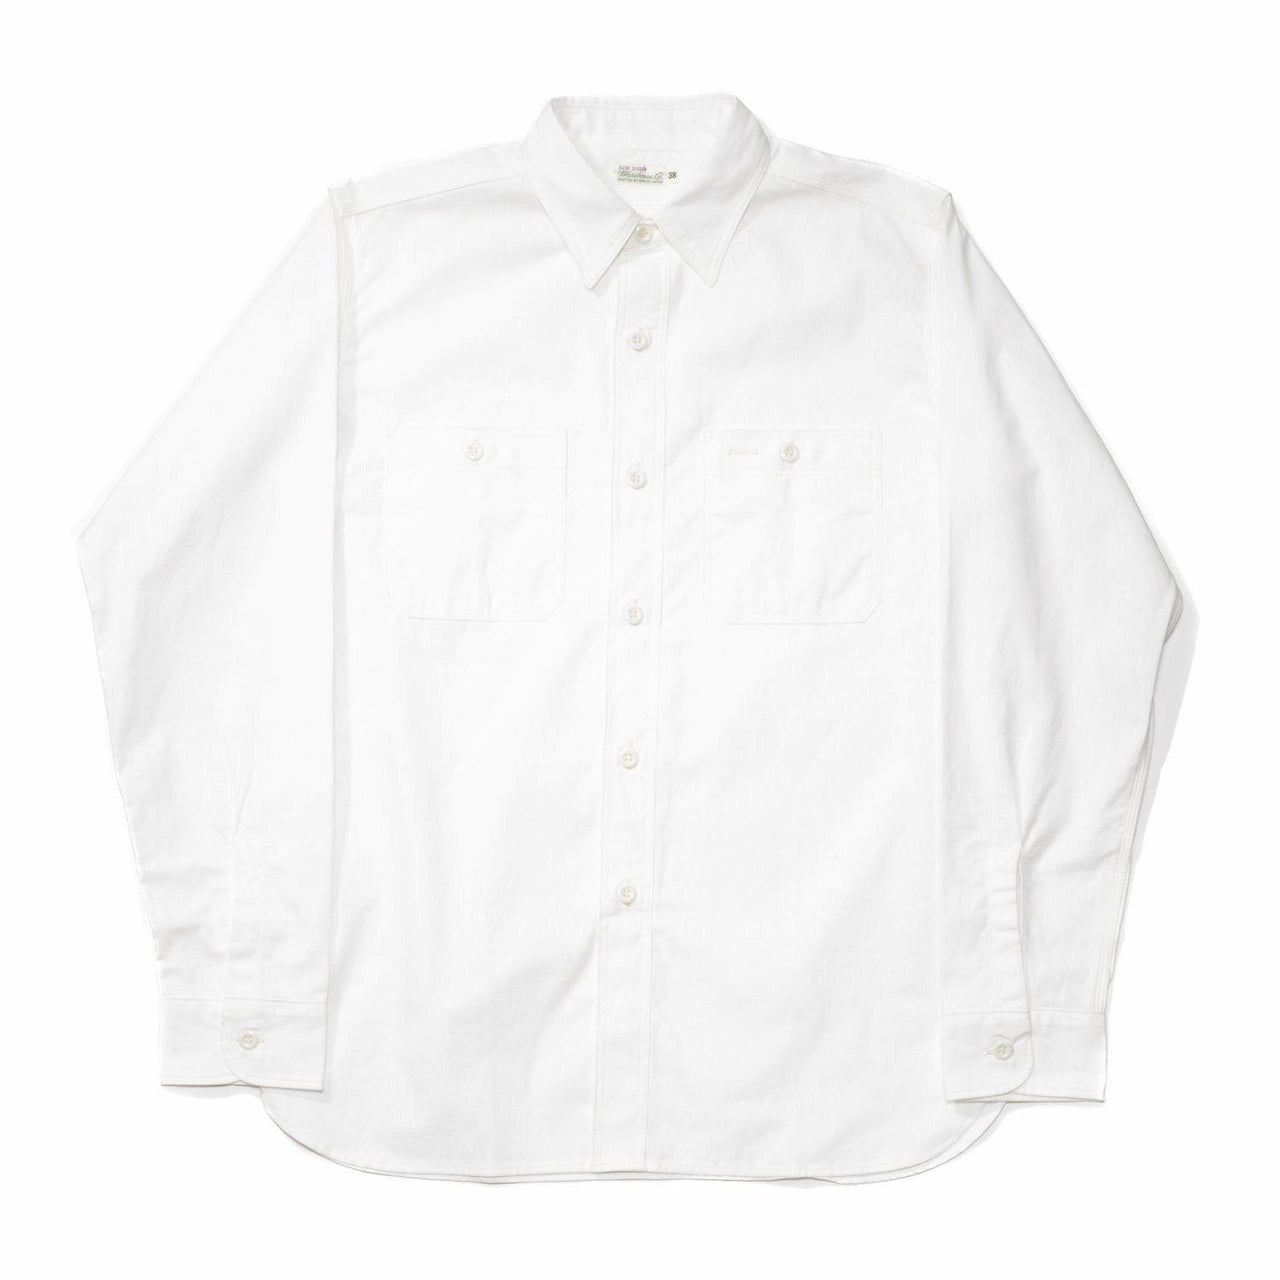 Warehouse Duck Digger 3076 Chambray Work Shirt White-Shirts-Clutch Cafe